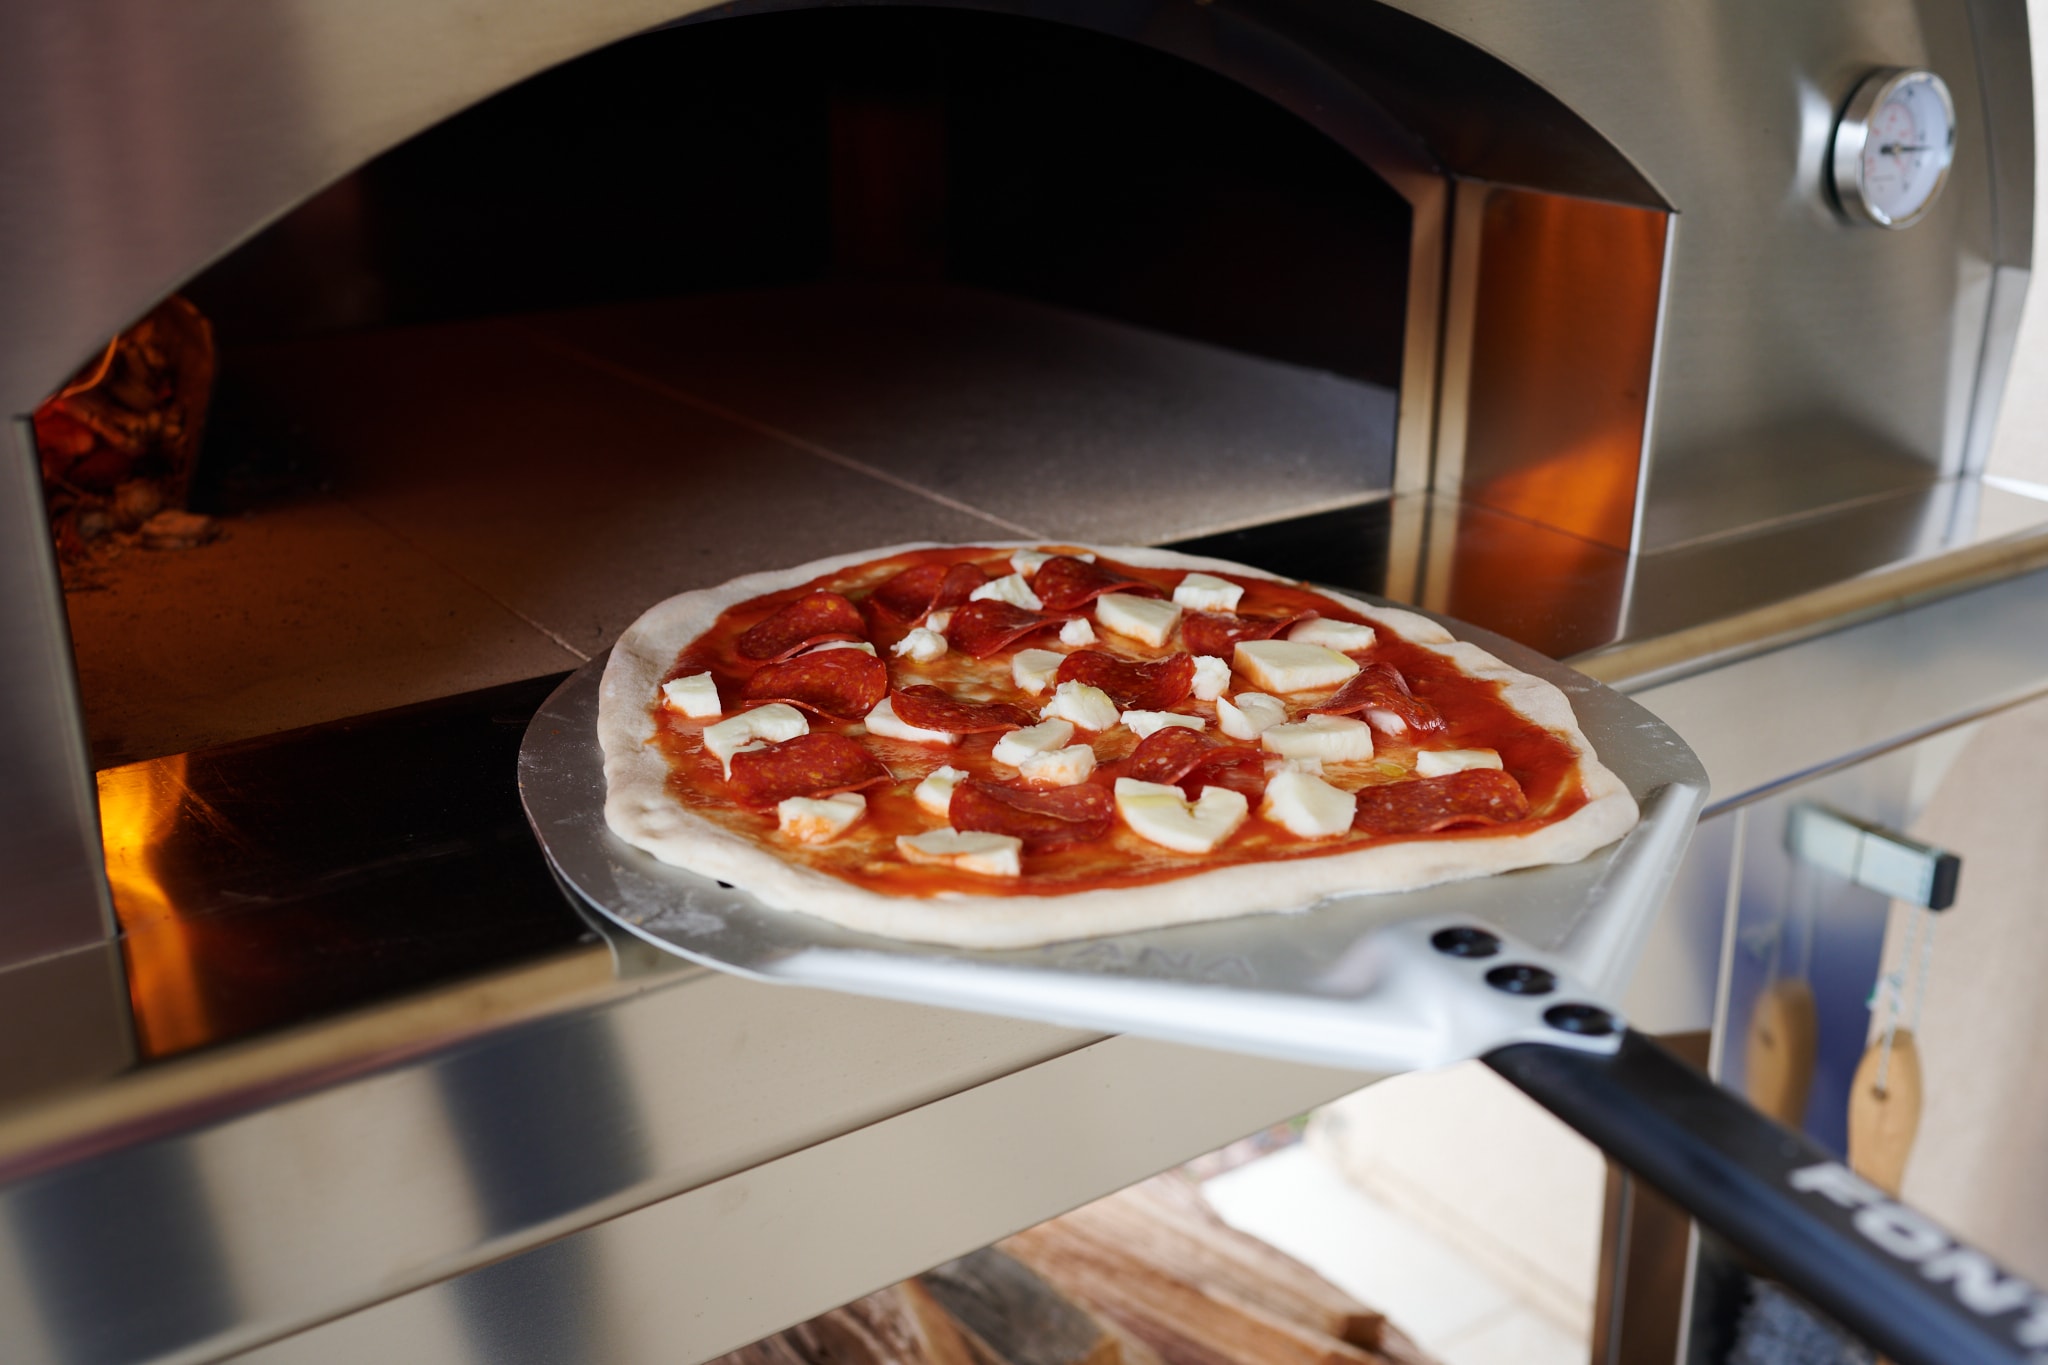 This 2-burner pizza oven cooks a 16 pizza in as few as 2 minutes